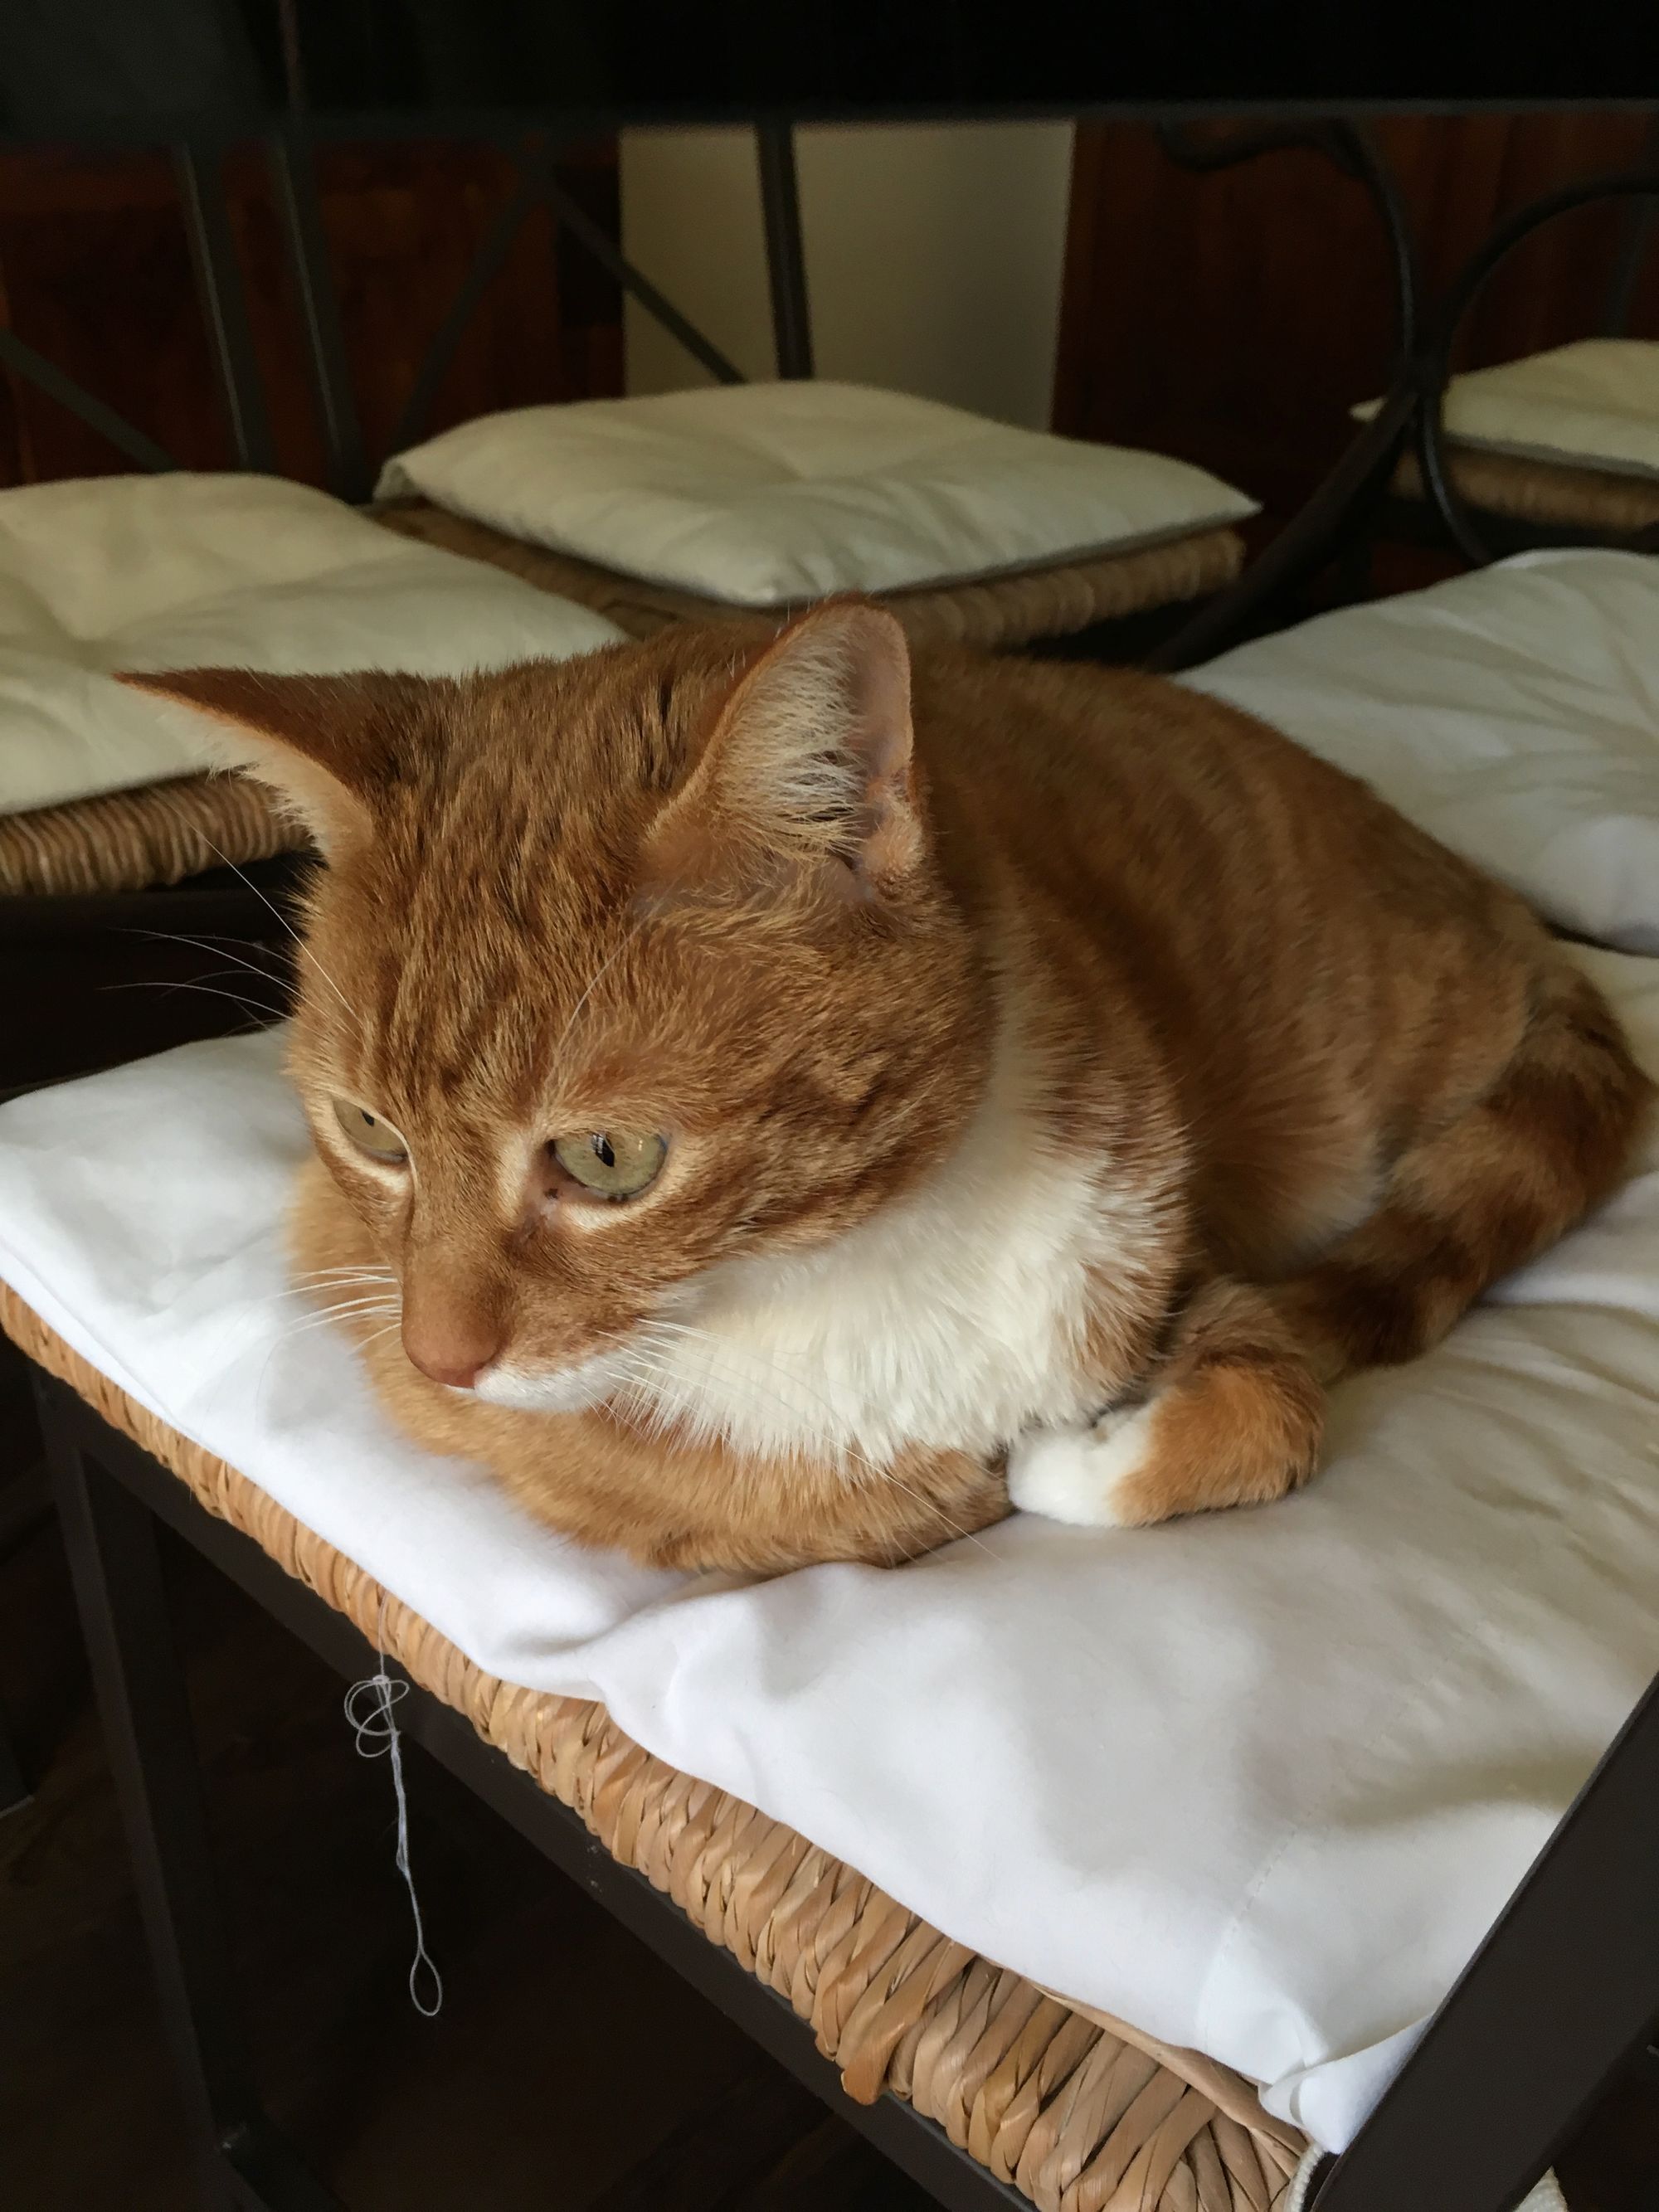 A ginger cat lounging on a chair